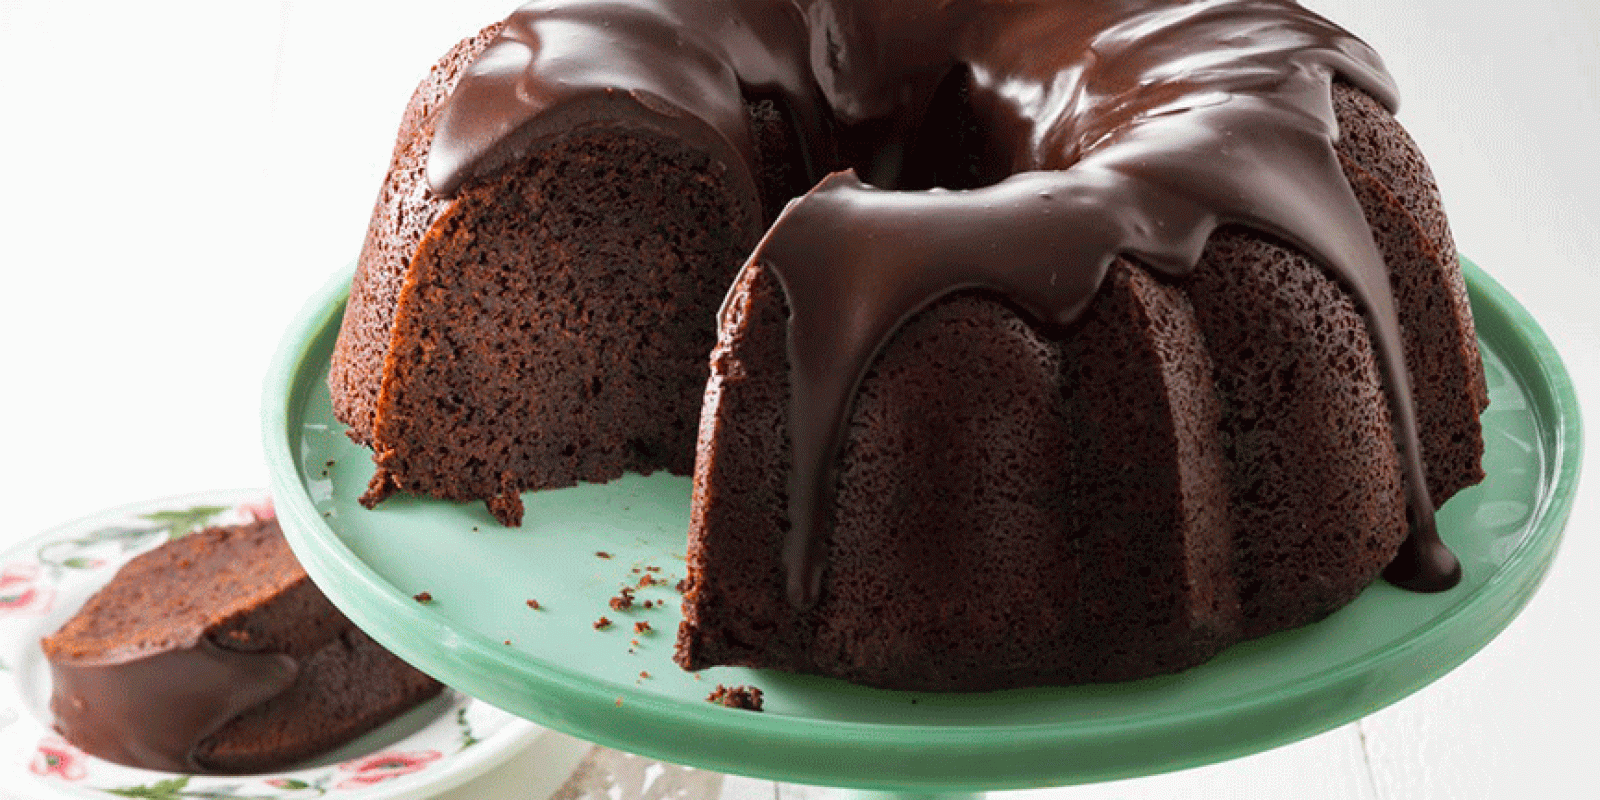 Surly Furious Chocolate Bundt Cake - Andrew Zimmern